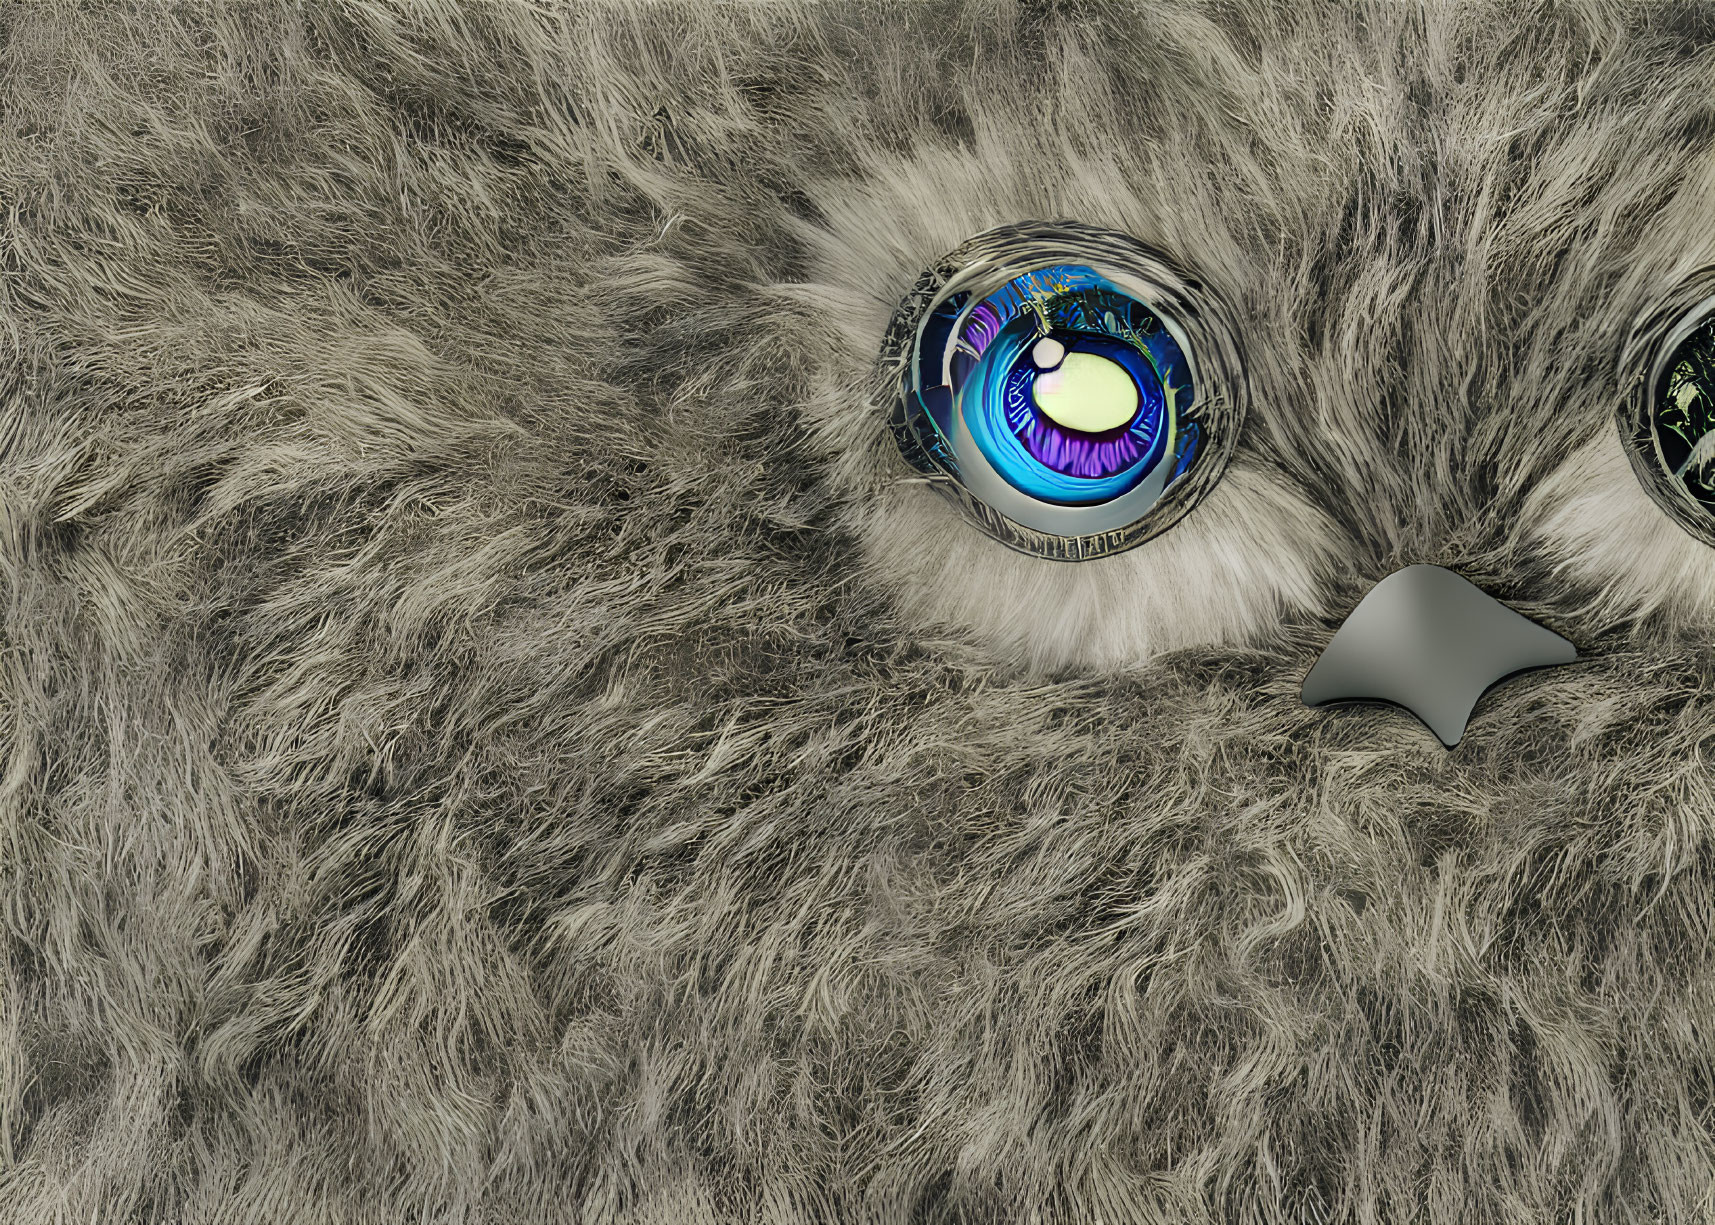 Textured grey and white furry background with detailed colorful robotic eye juxtaposed with simple black eye